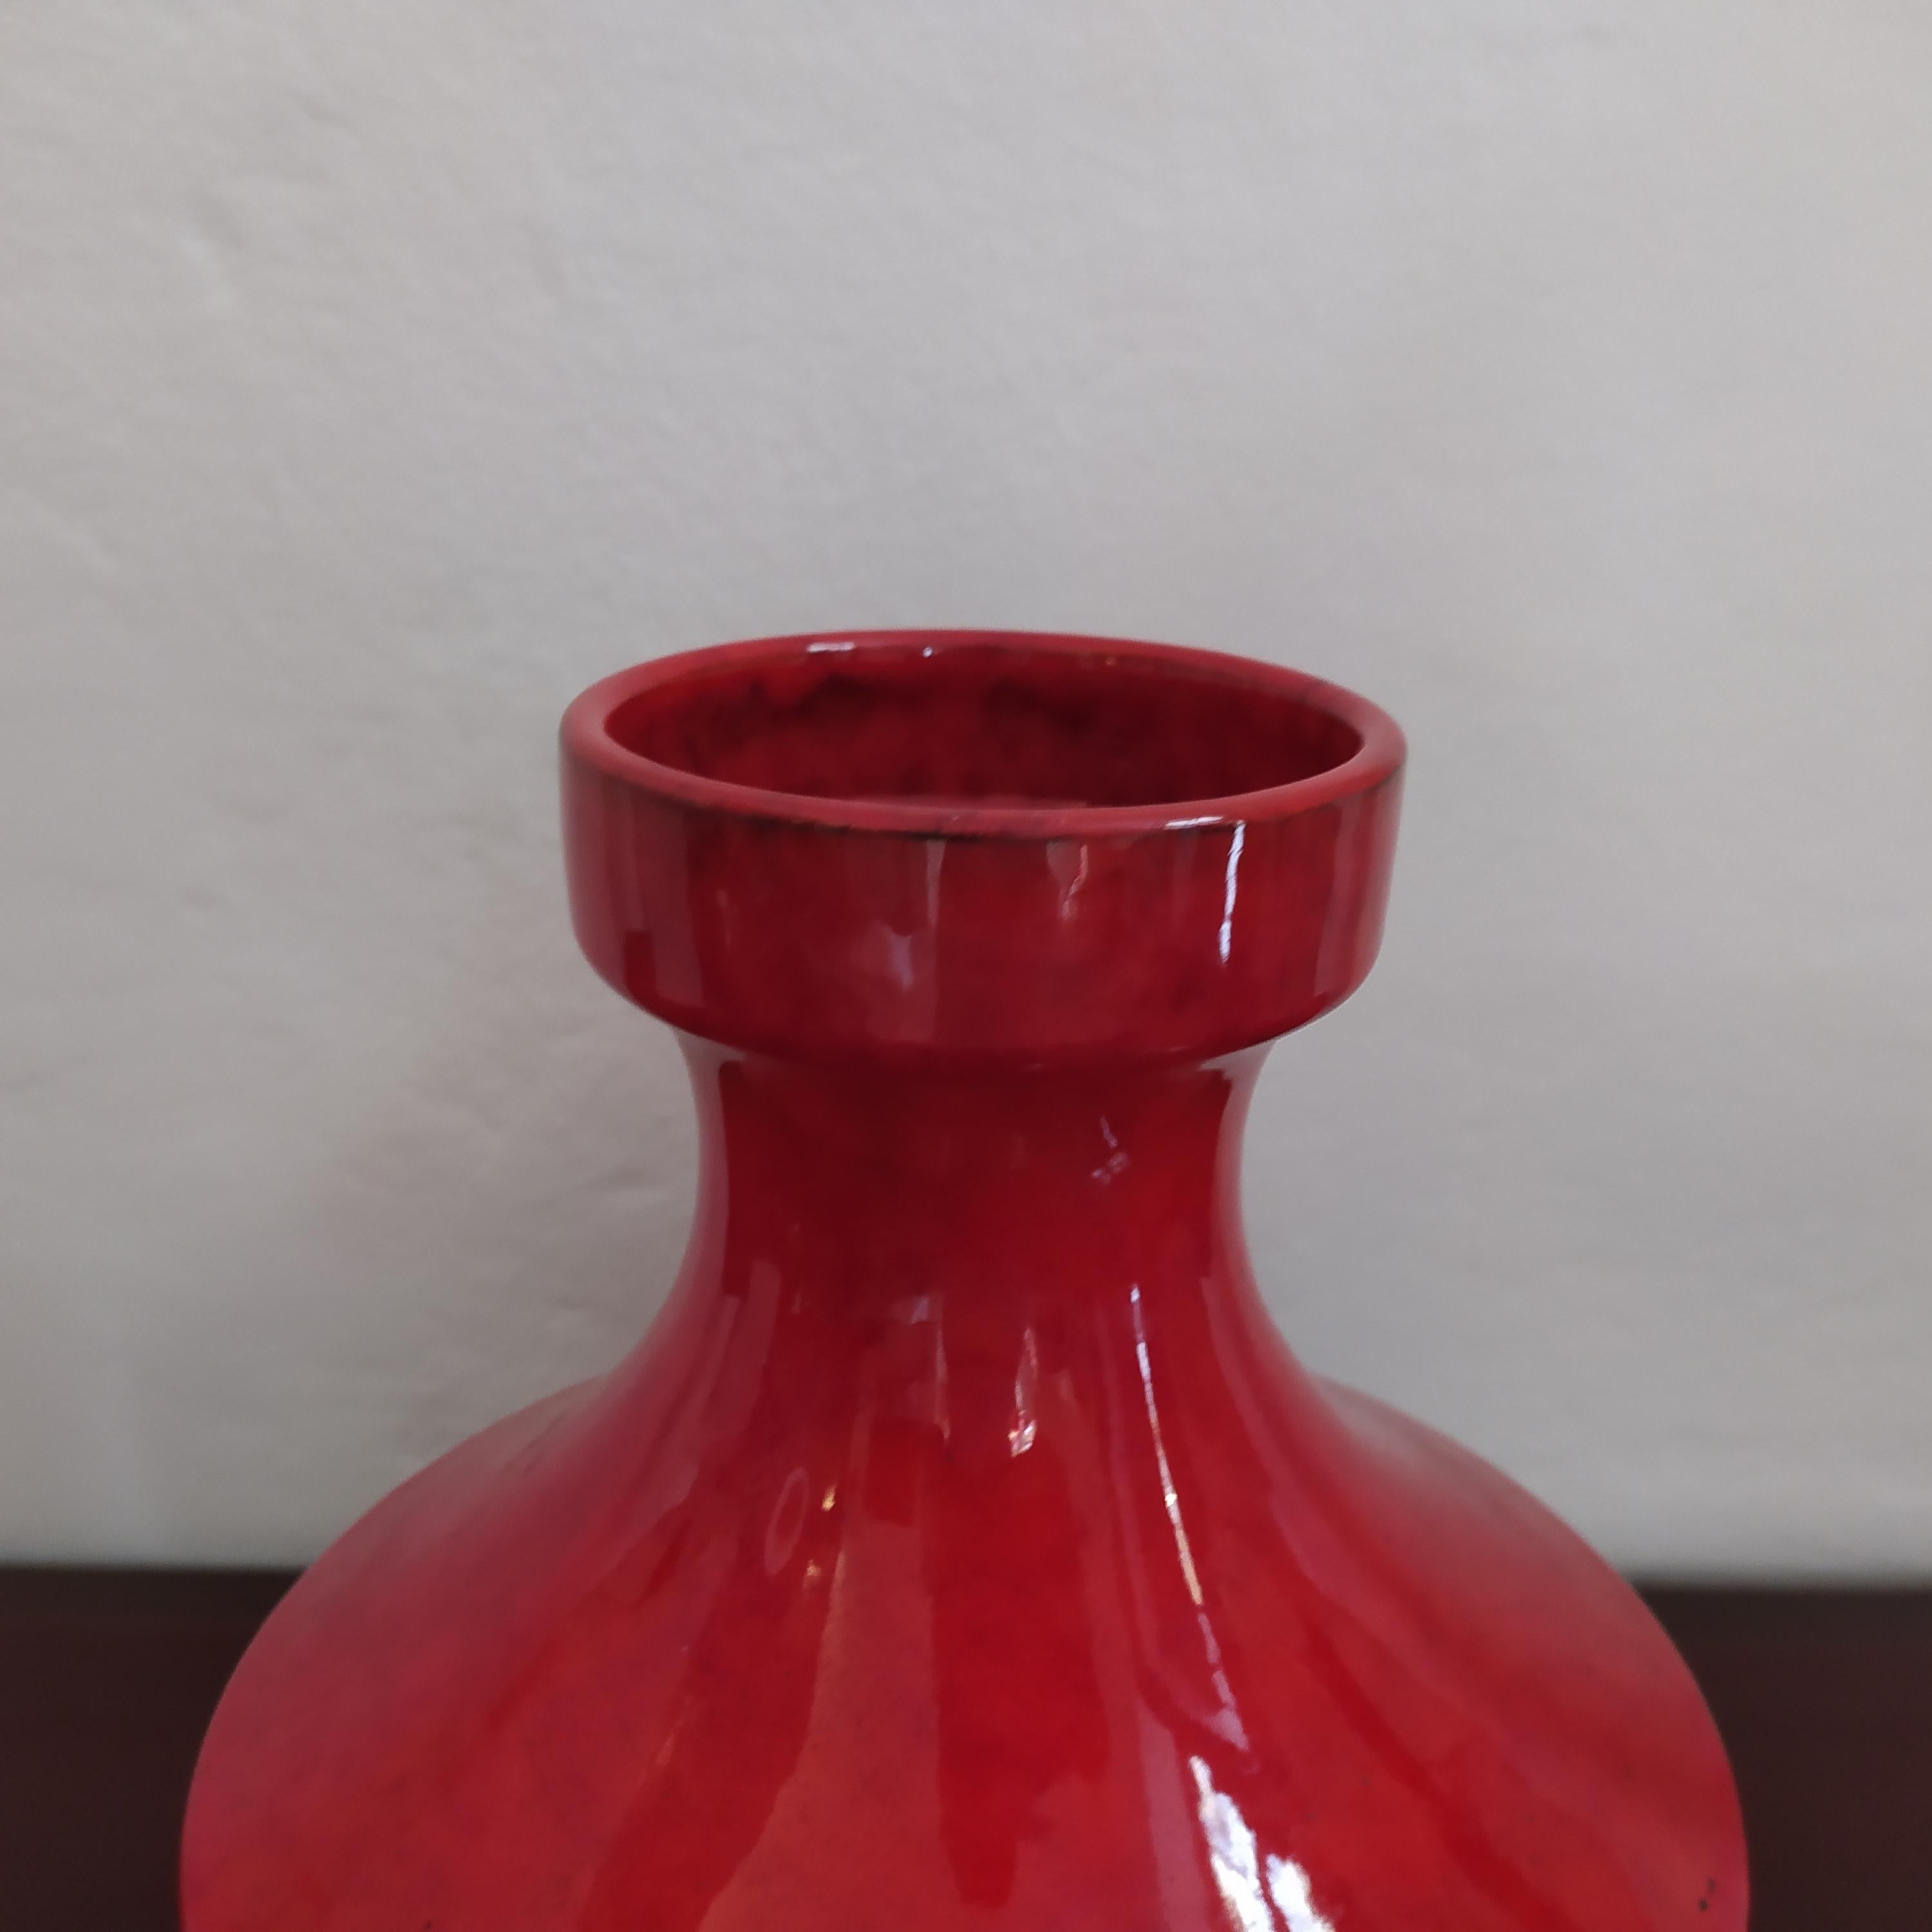 European 1970s Space Age Red Vase in Ceramic by Gabbianelli, Made in Italy For Sale